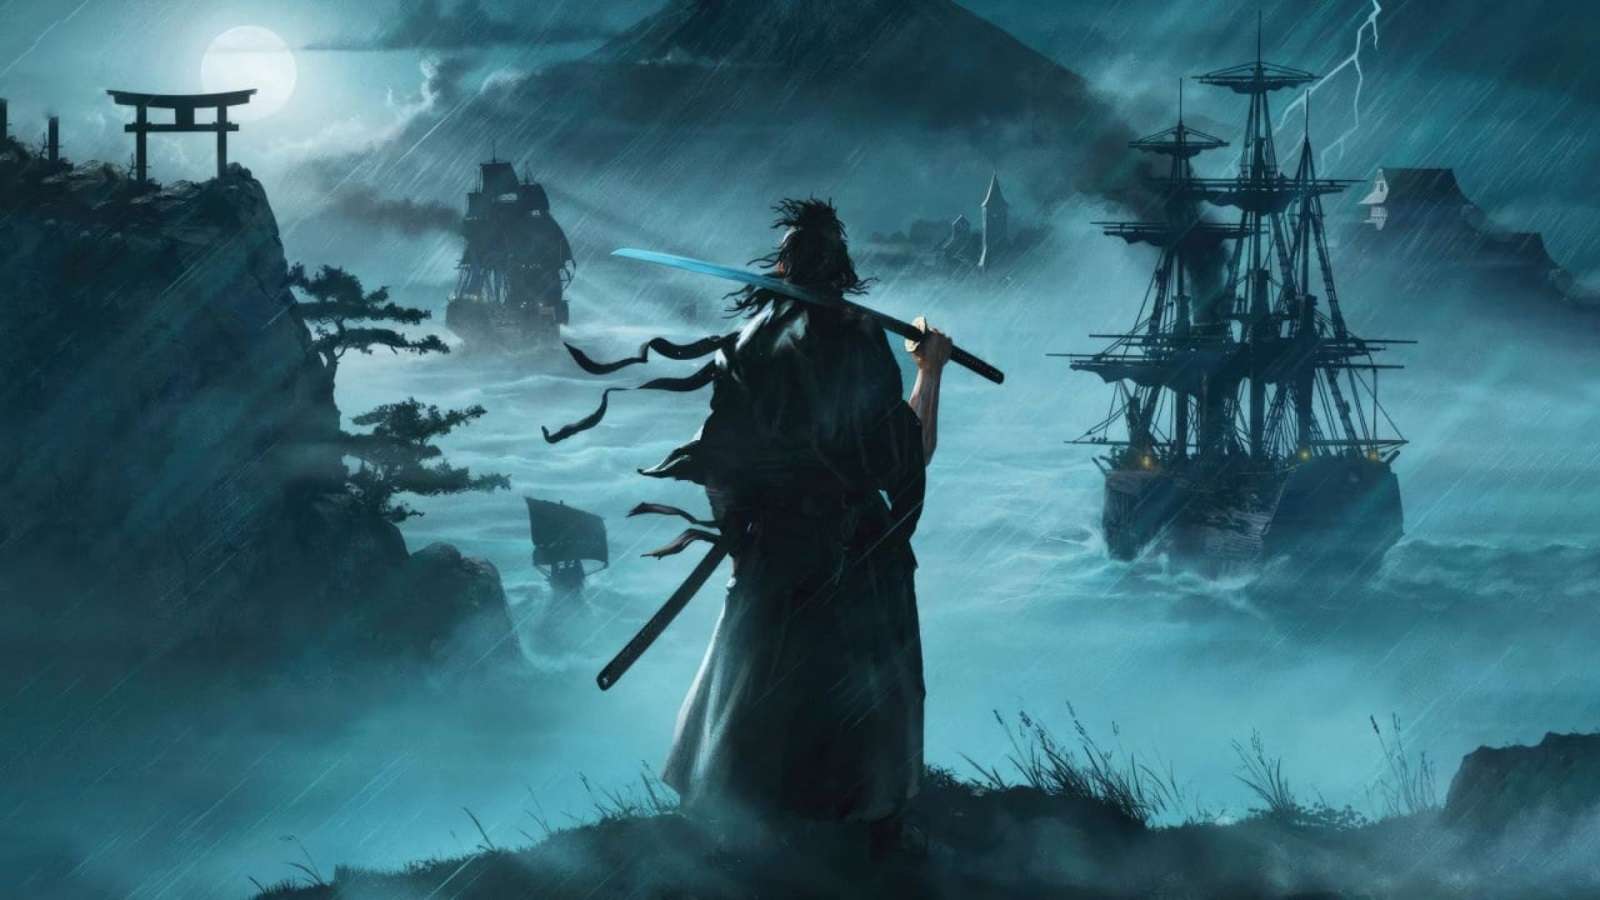 Rise of the Ronin cover art